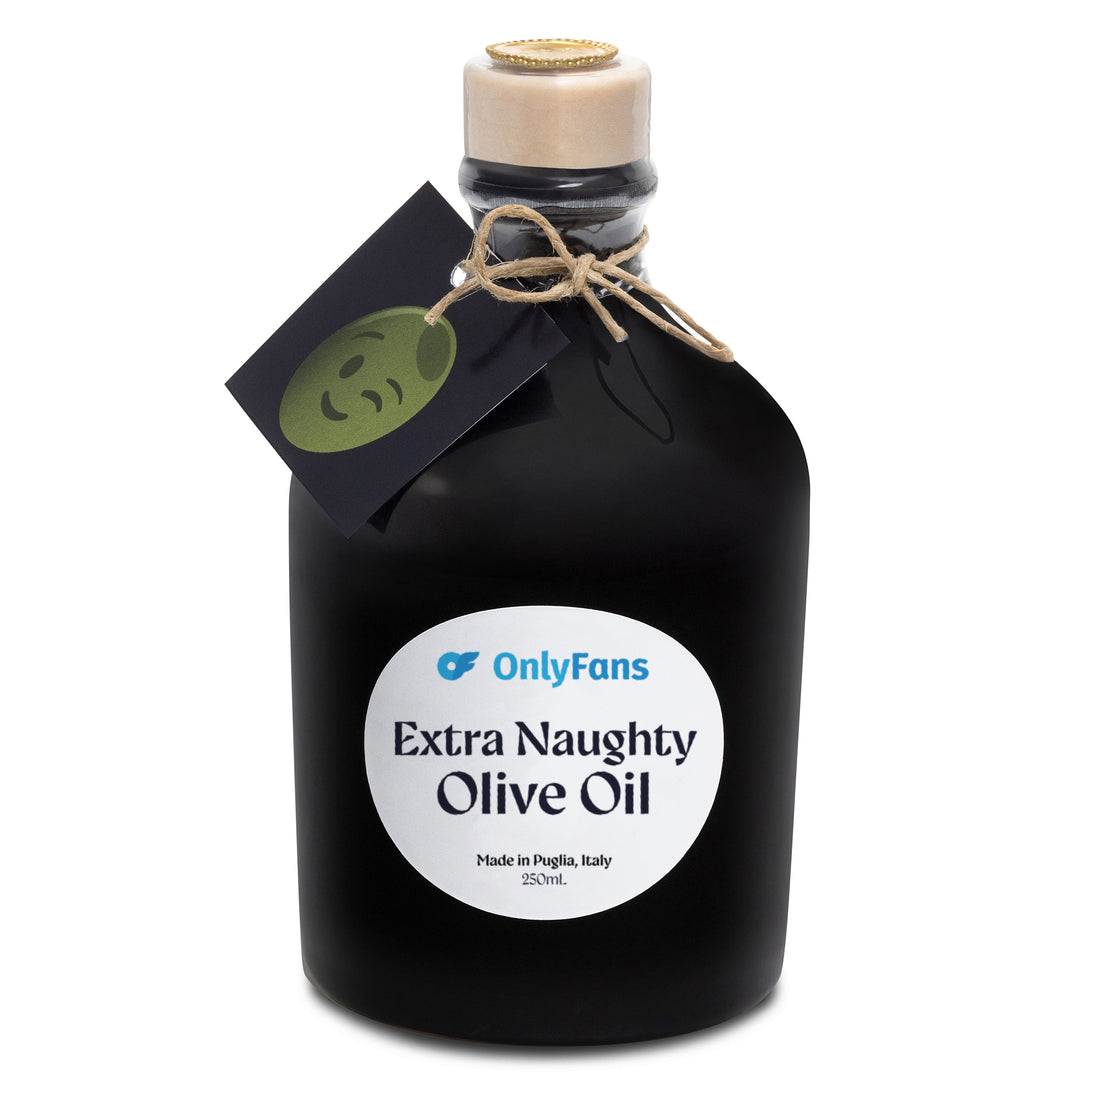 OnlyFans Extra Naughty Olive Oil